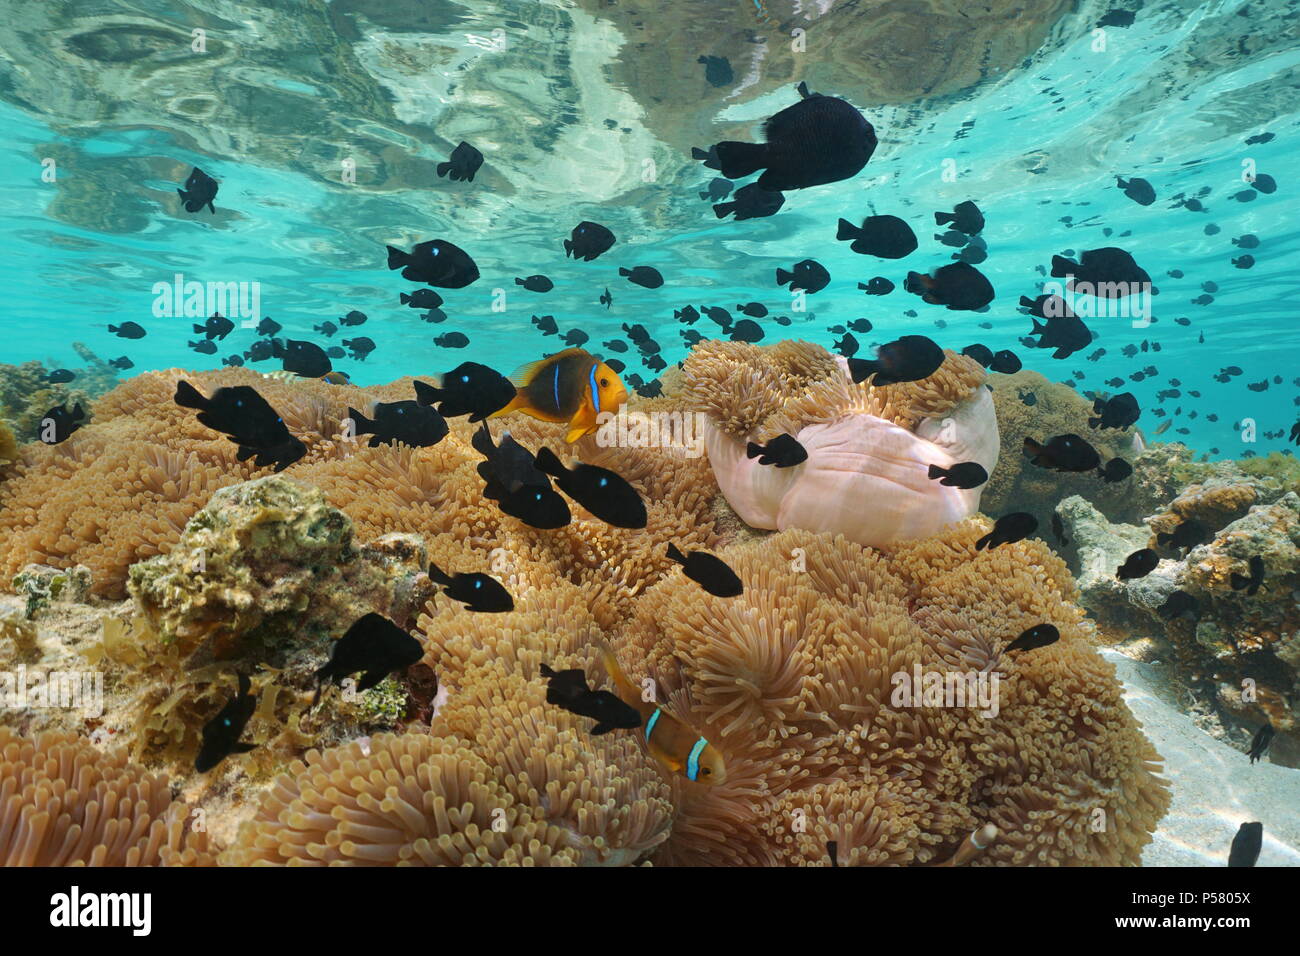 Underwater a school of tropical fish ( mostly damselfish with some clownfish ) and sea anemones, lagoon of Huahine, Pacific ocean, French Polynesia Stock Photo